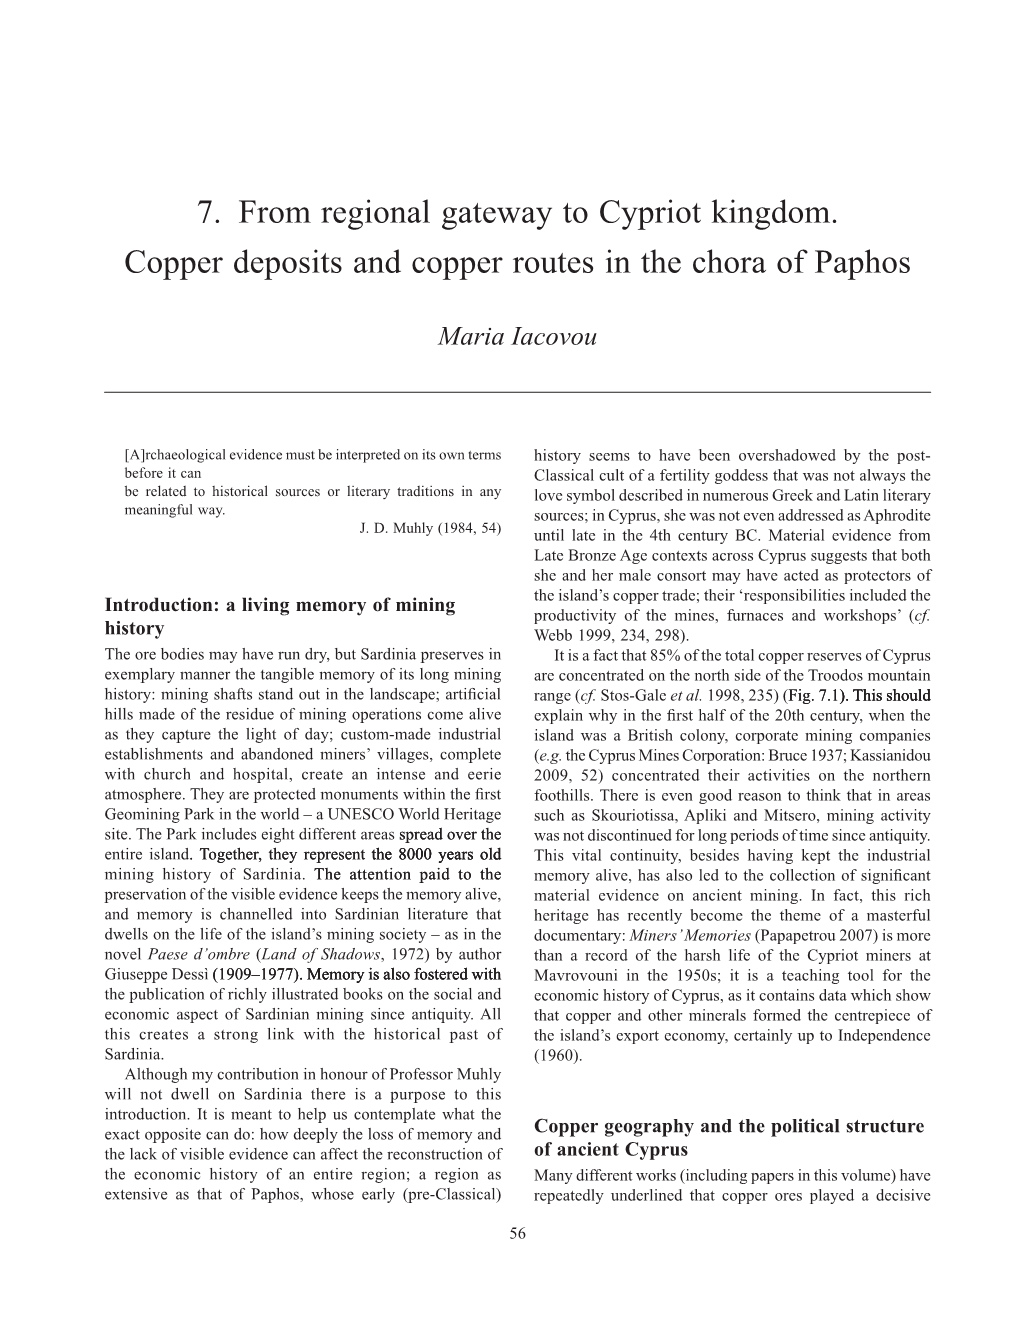 Iacovou, M. (2012), "From Regional Gateway to Cypriot Kingdom. Copper Deposits and Copper Routes In